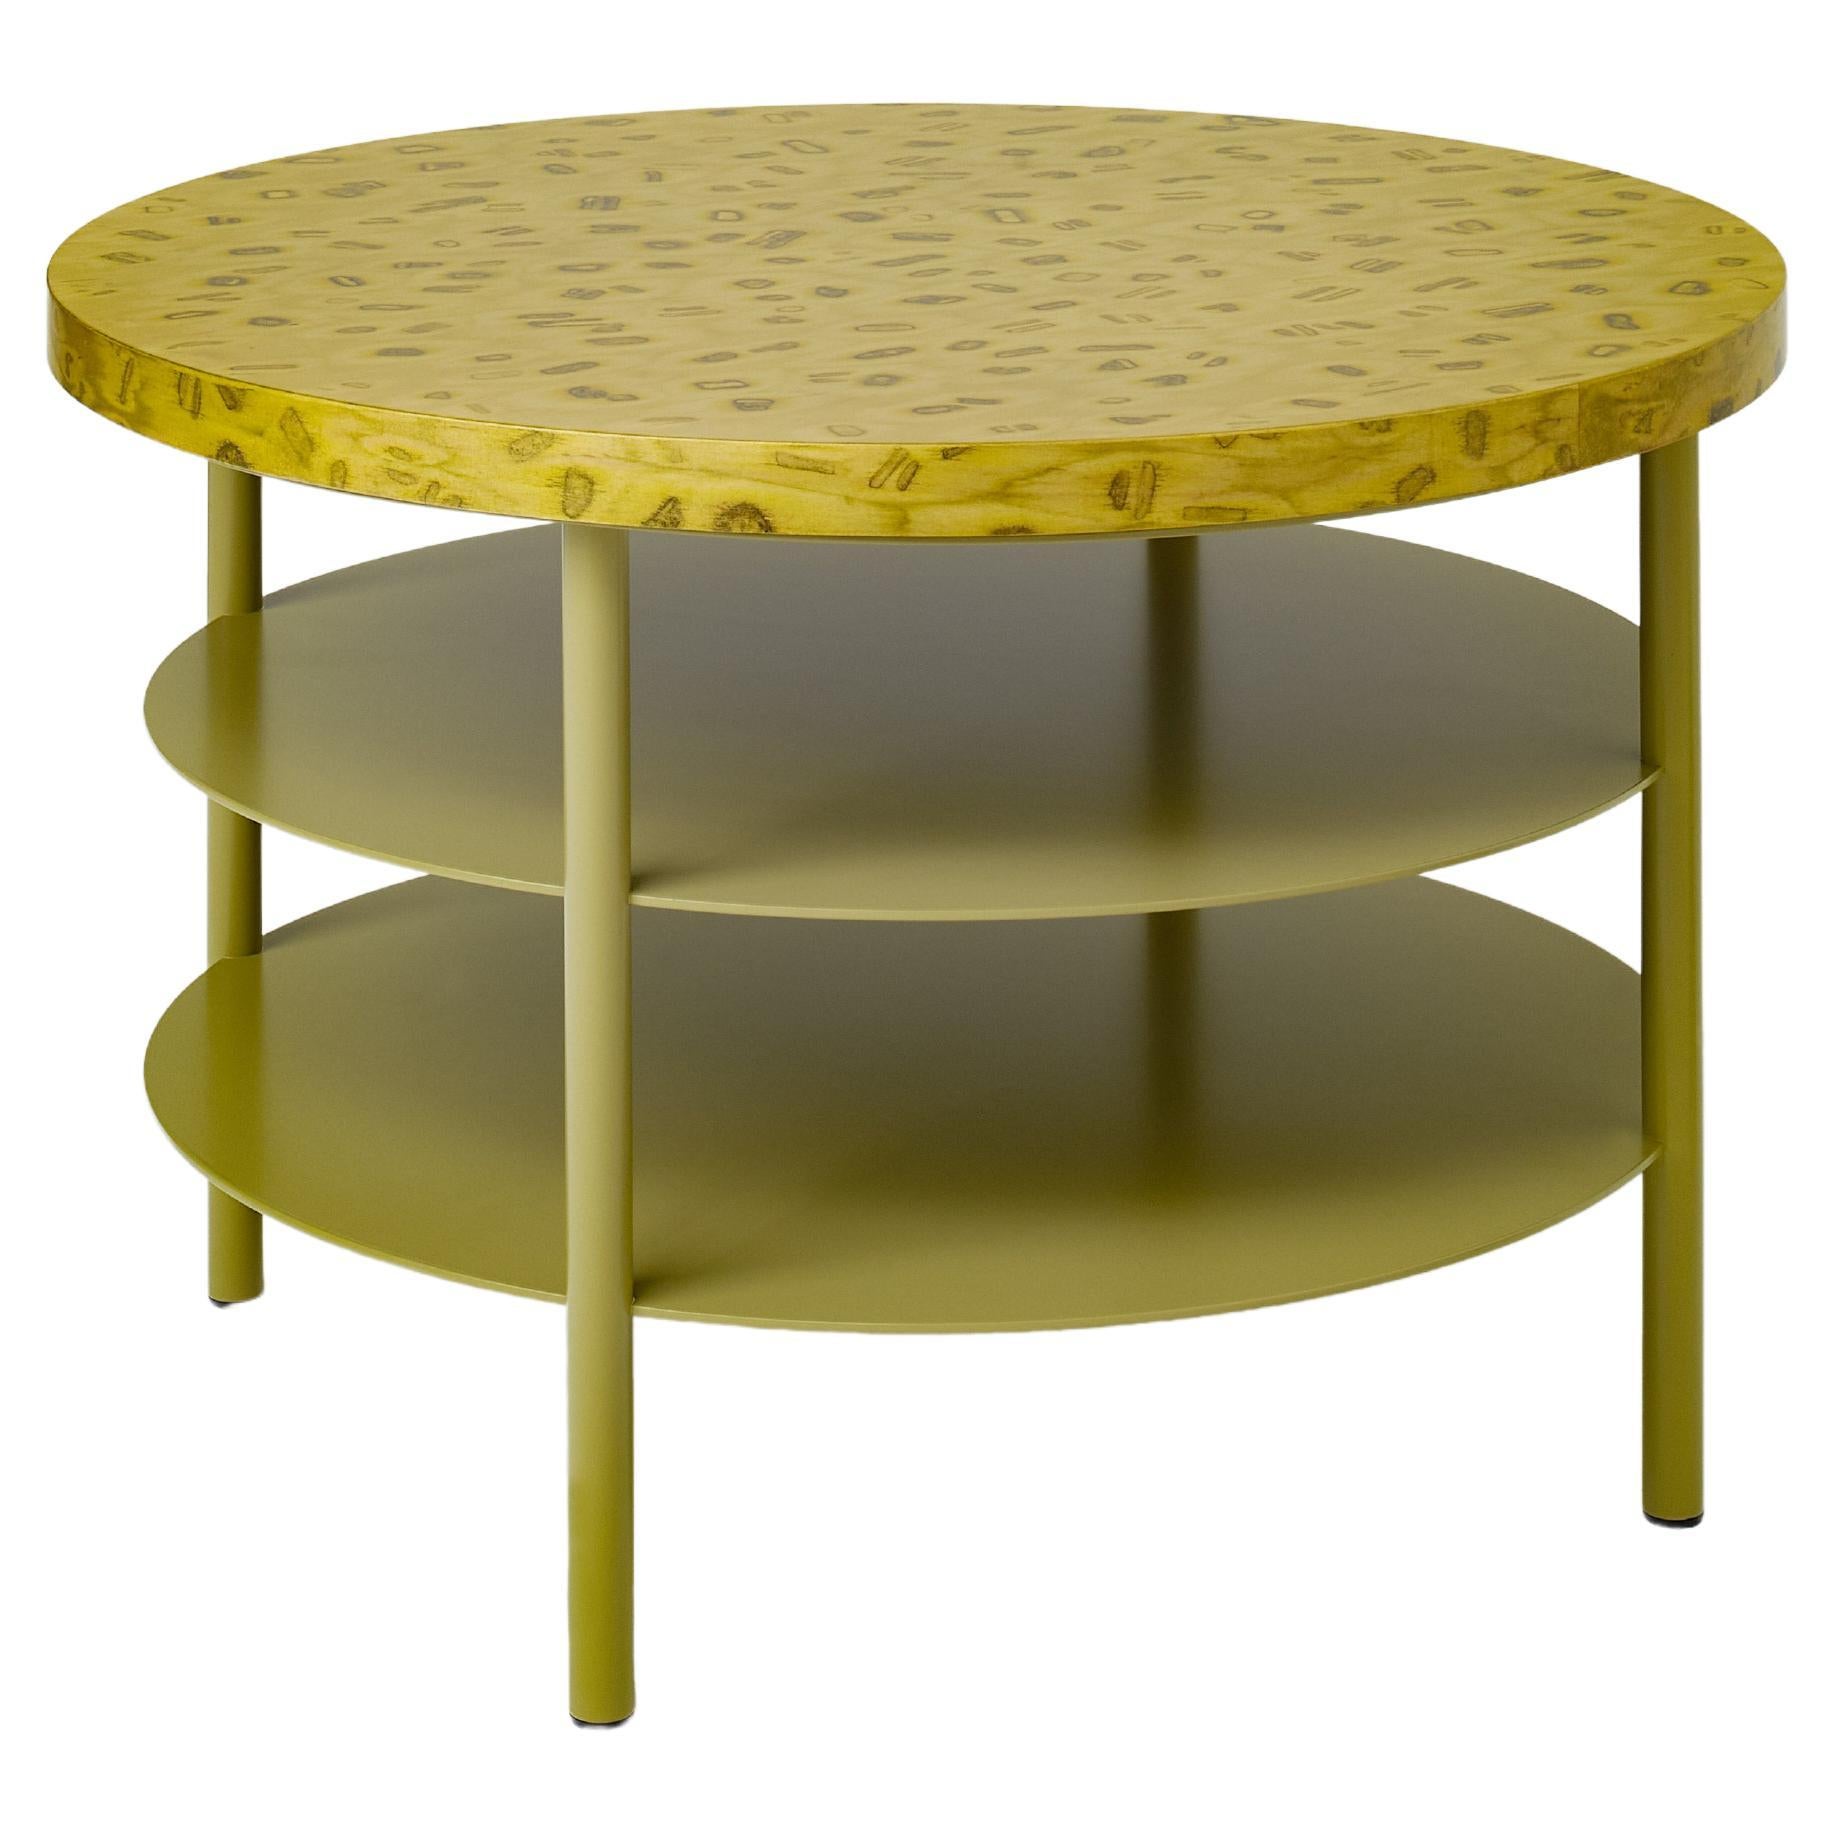 Tiered Yellow Coffee Table, Osis Pila Midi by Llot Llov For Sale